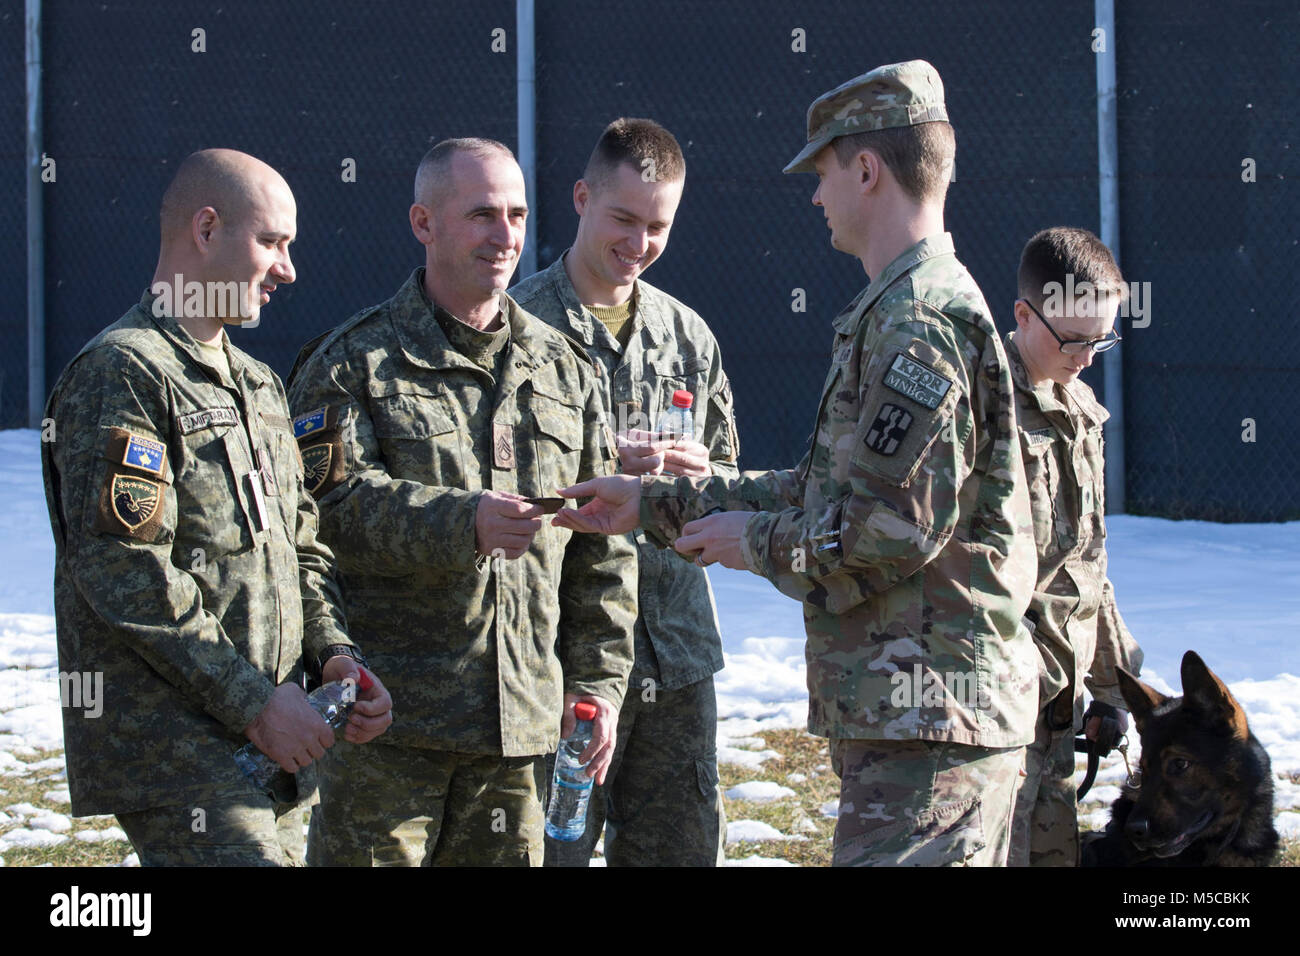 Capt. Jarrod Miller a field service veterinarian for KFOR Multinational Battle Group-East, Task Force Medical, exchanges unit patches with Kosovo Security Force, Search and Rescue soldiers after a Military Working Dog demonstration, Jan. 31, 2018 on Camp Bondsteel, Kosovo. (U.S. Army Stock Photo